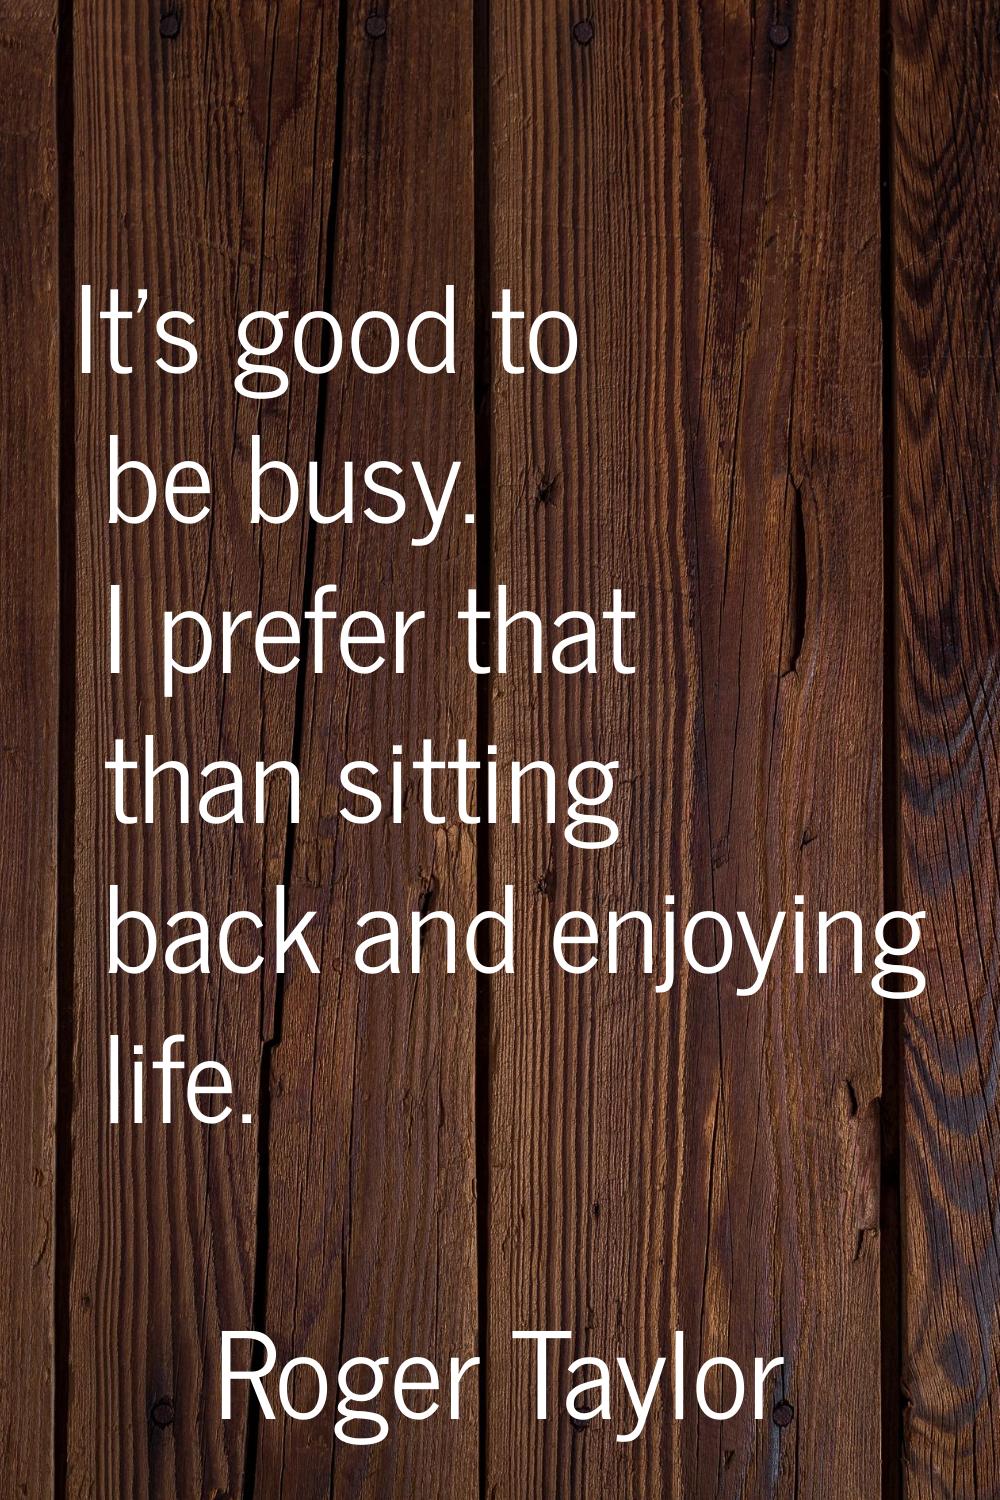 It's good to be busy. I prefer that than sitting back and enjoying life.